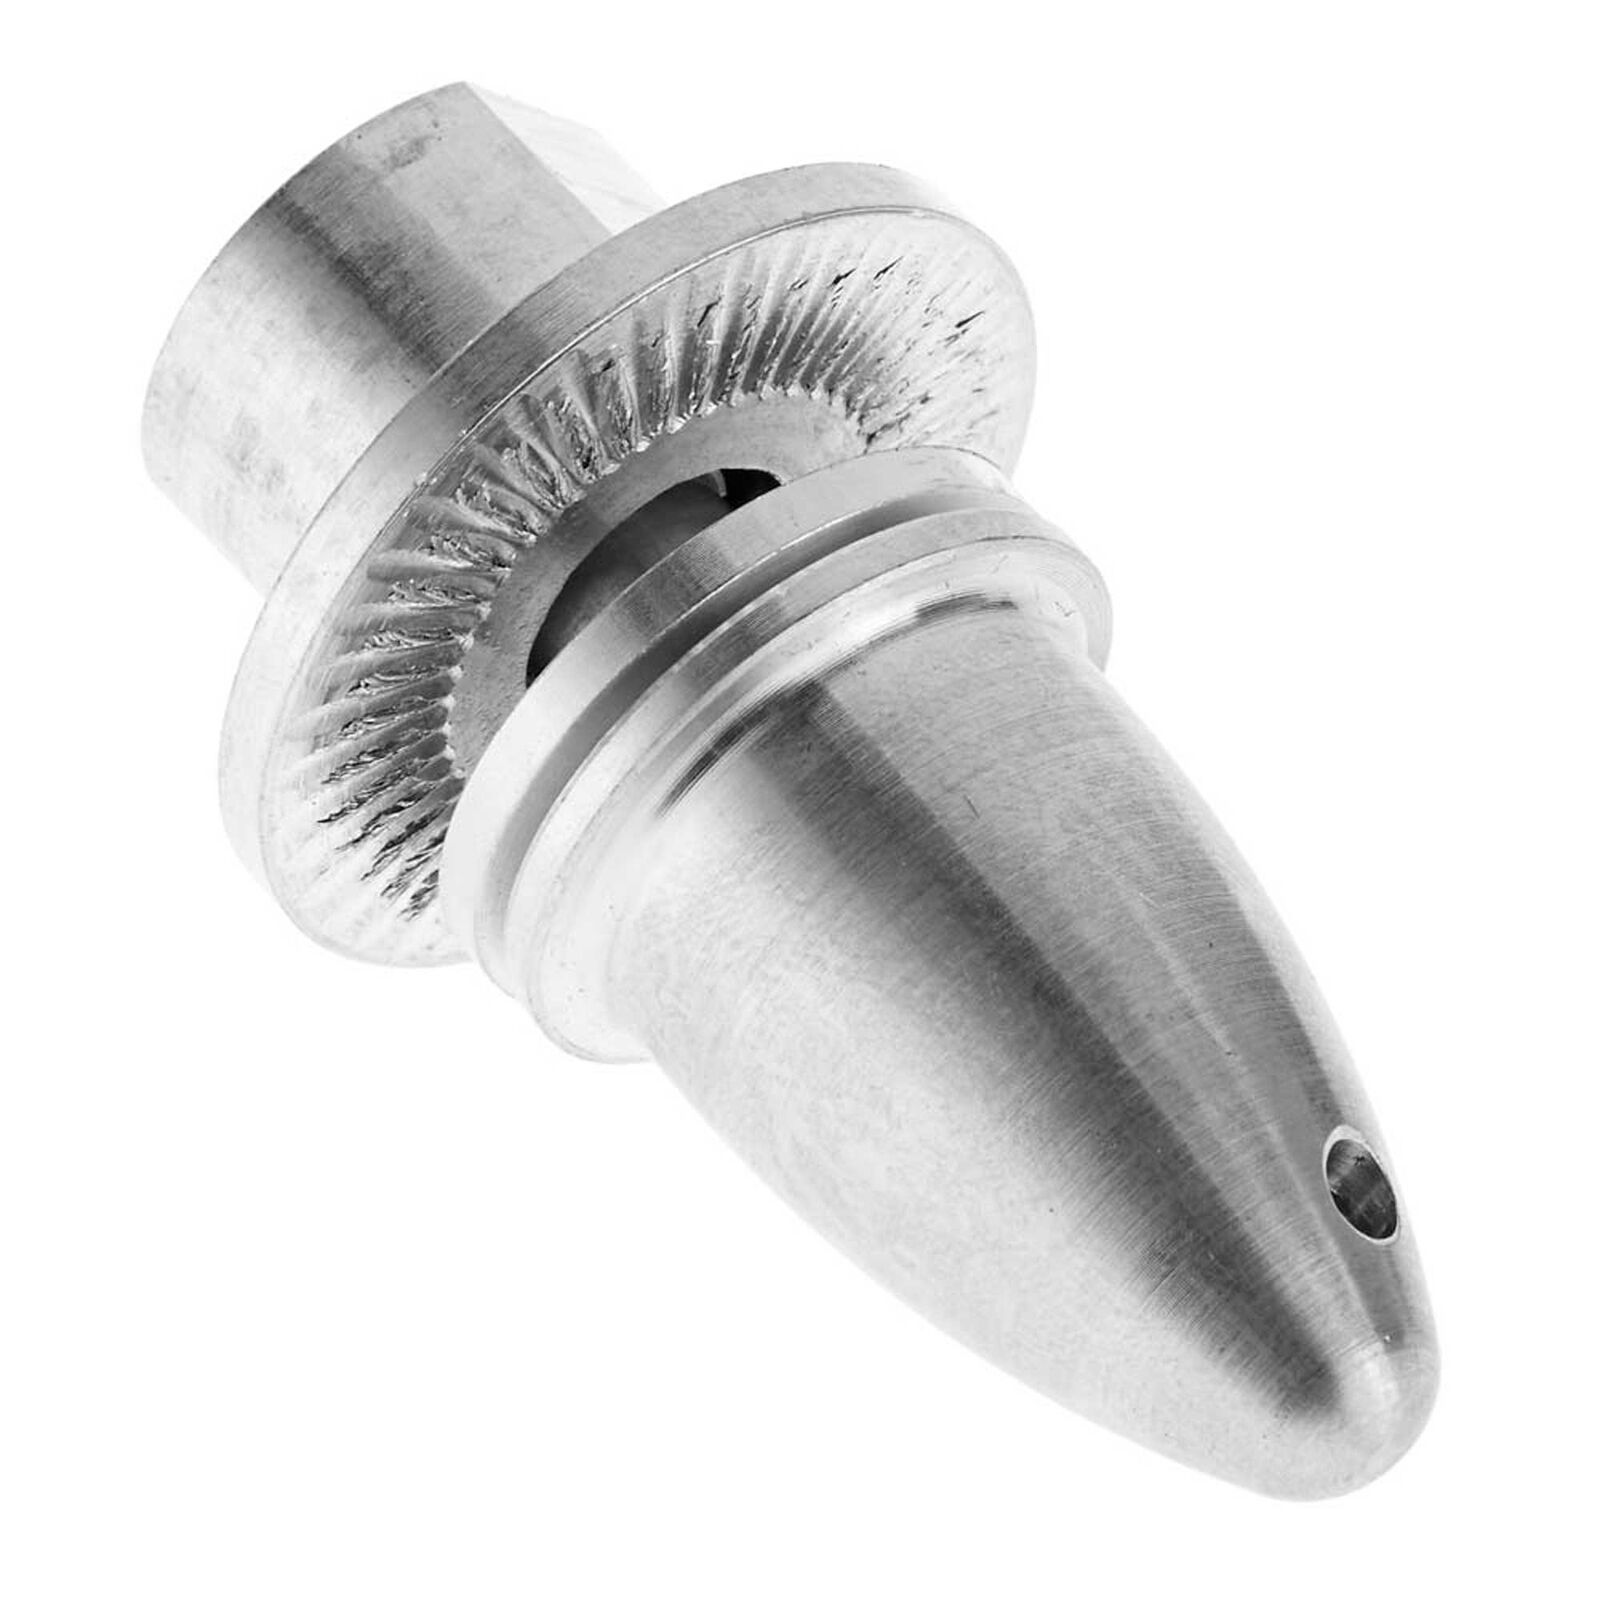 Collet Cone Adapter 6mm-5 16x24 Prop Shaft